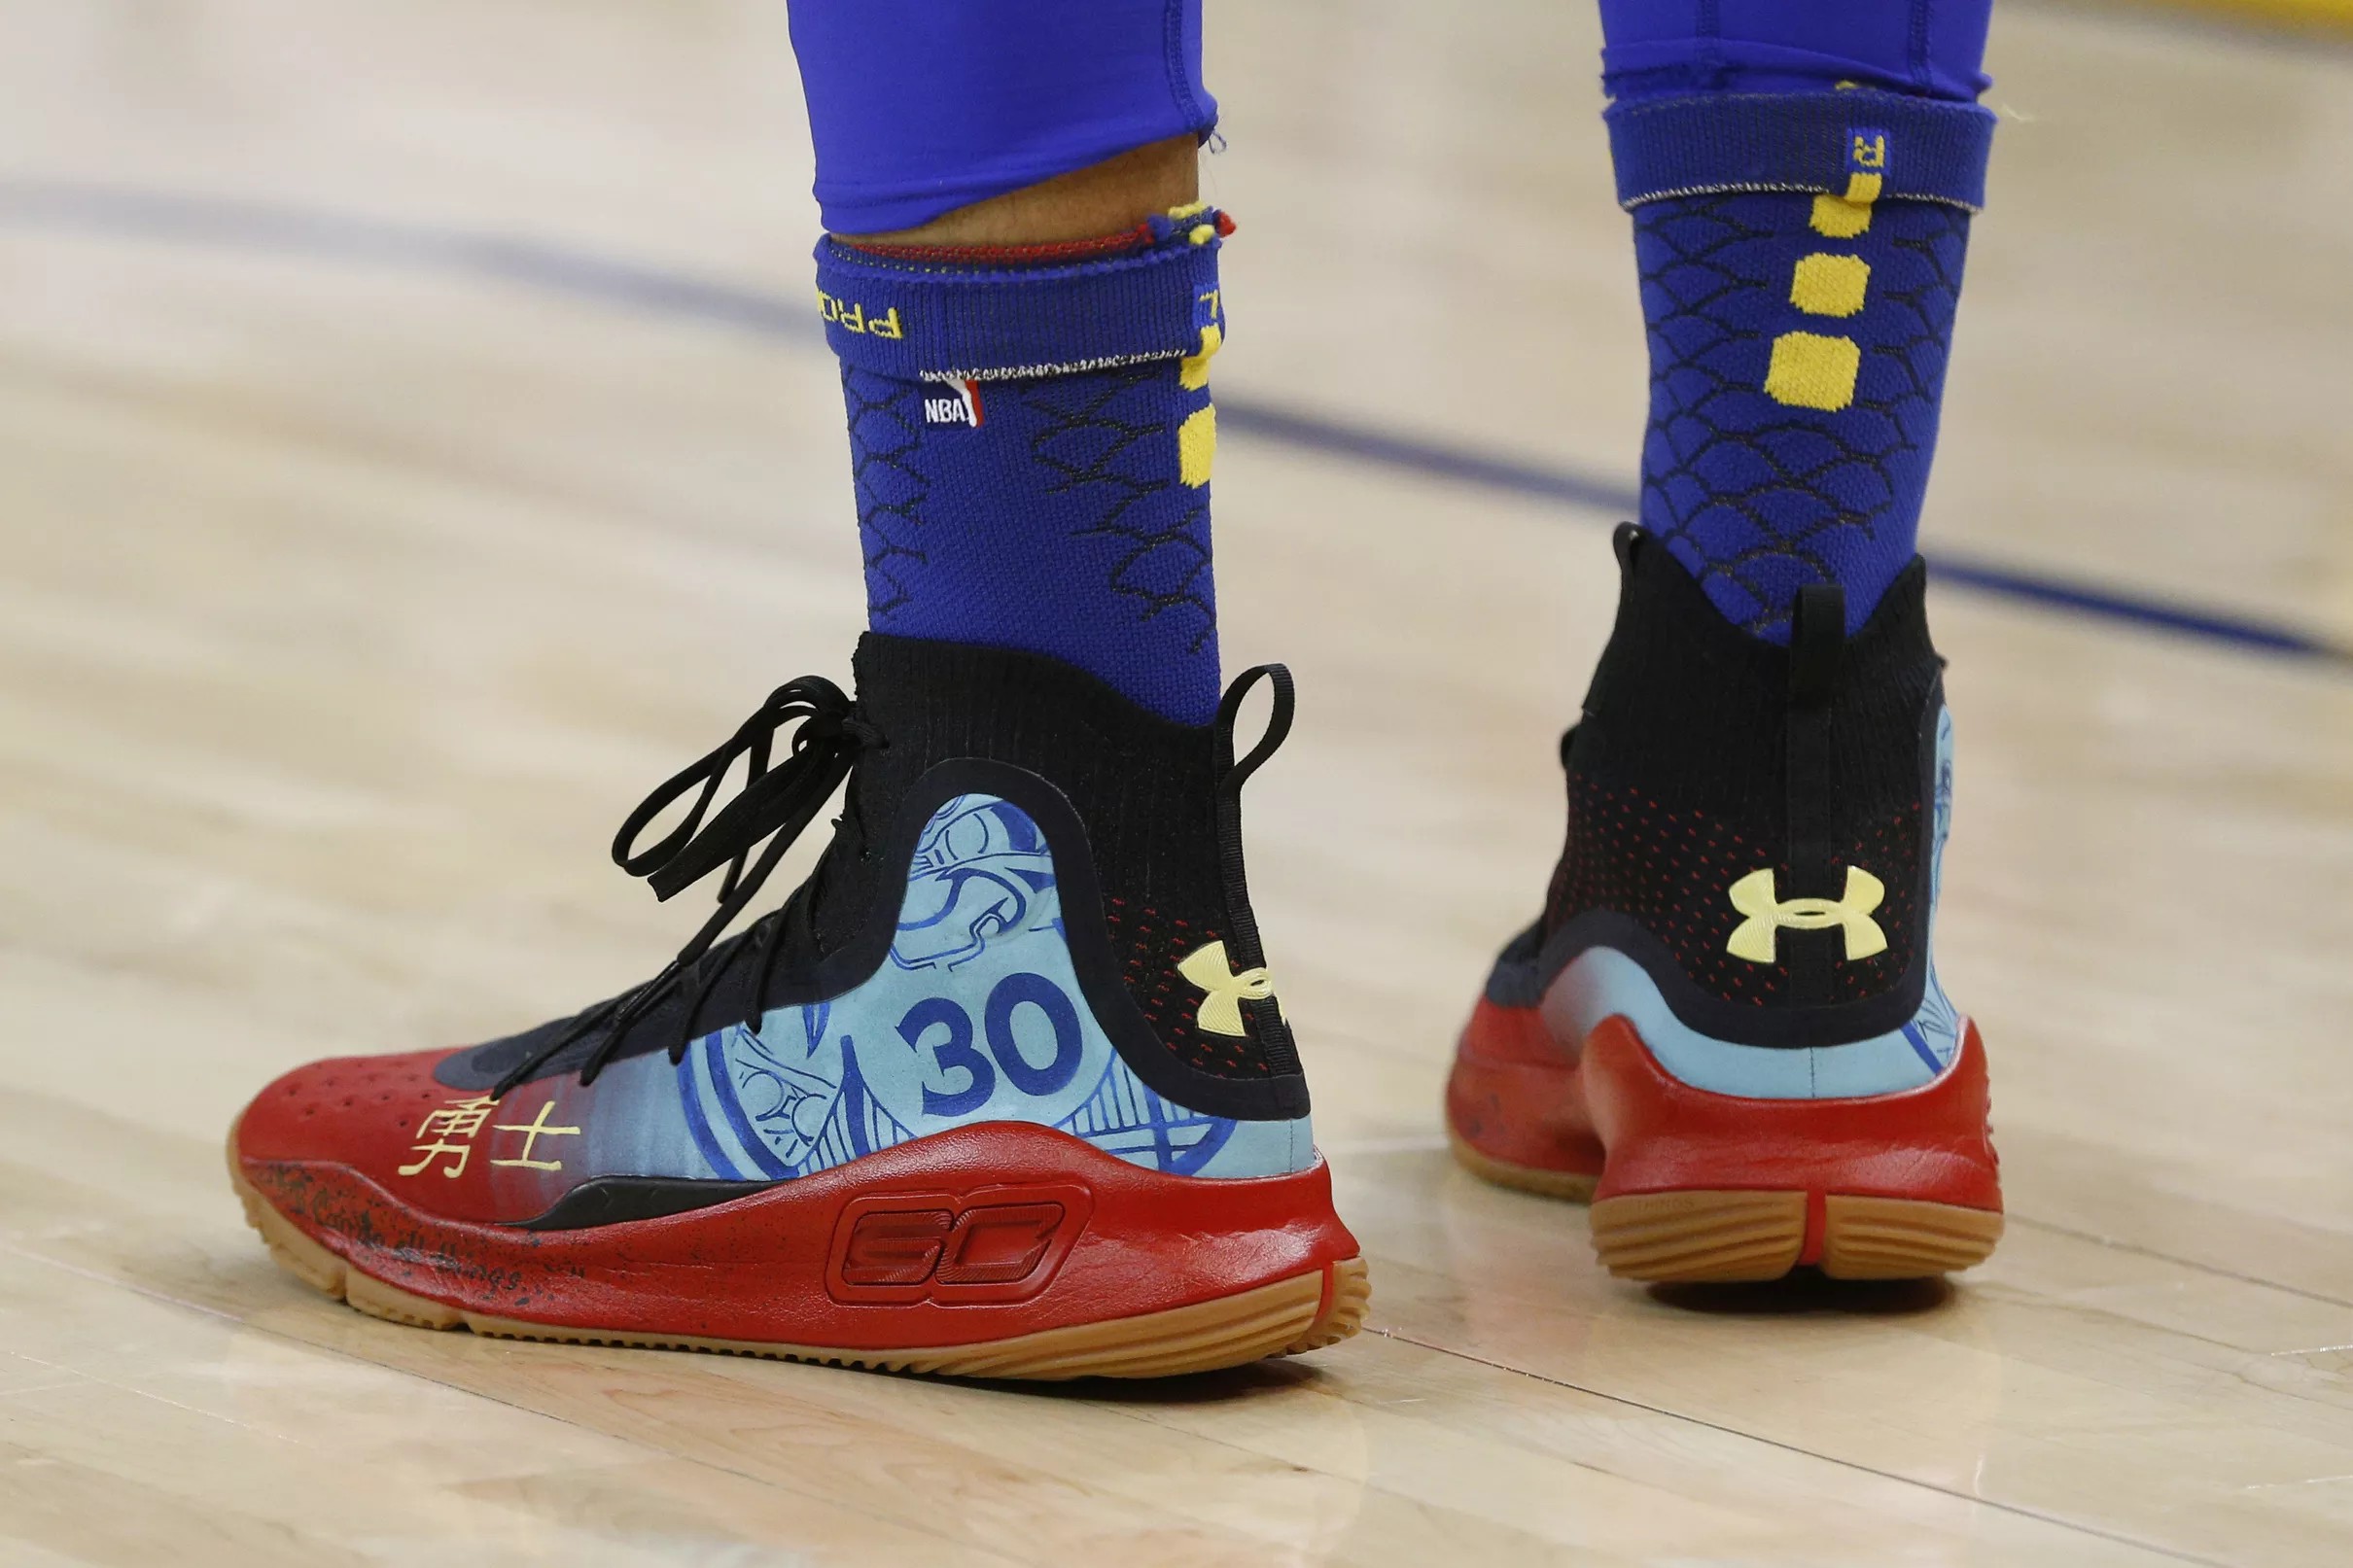 Steph Curry gives unreleased shoes to UMBC after historic upset